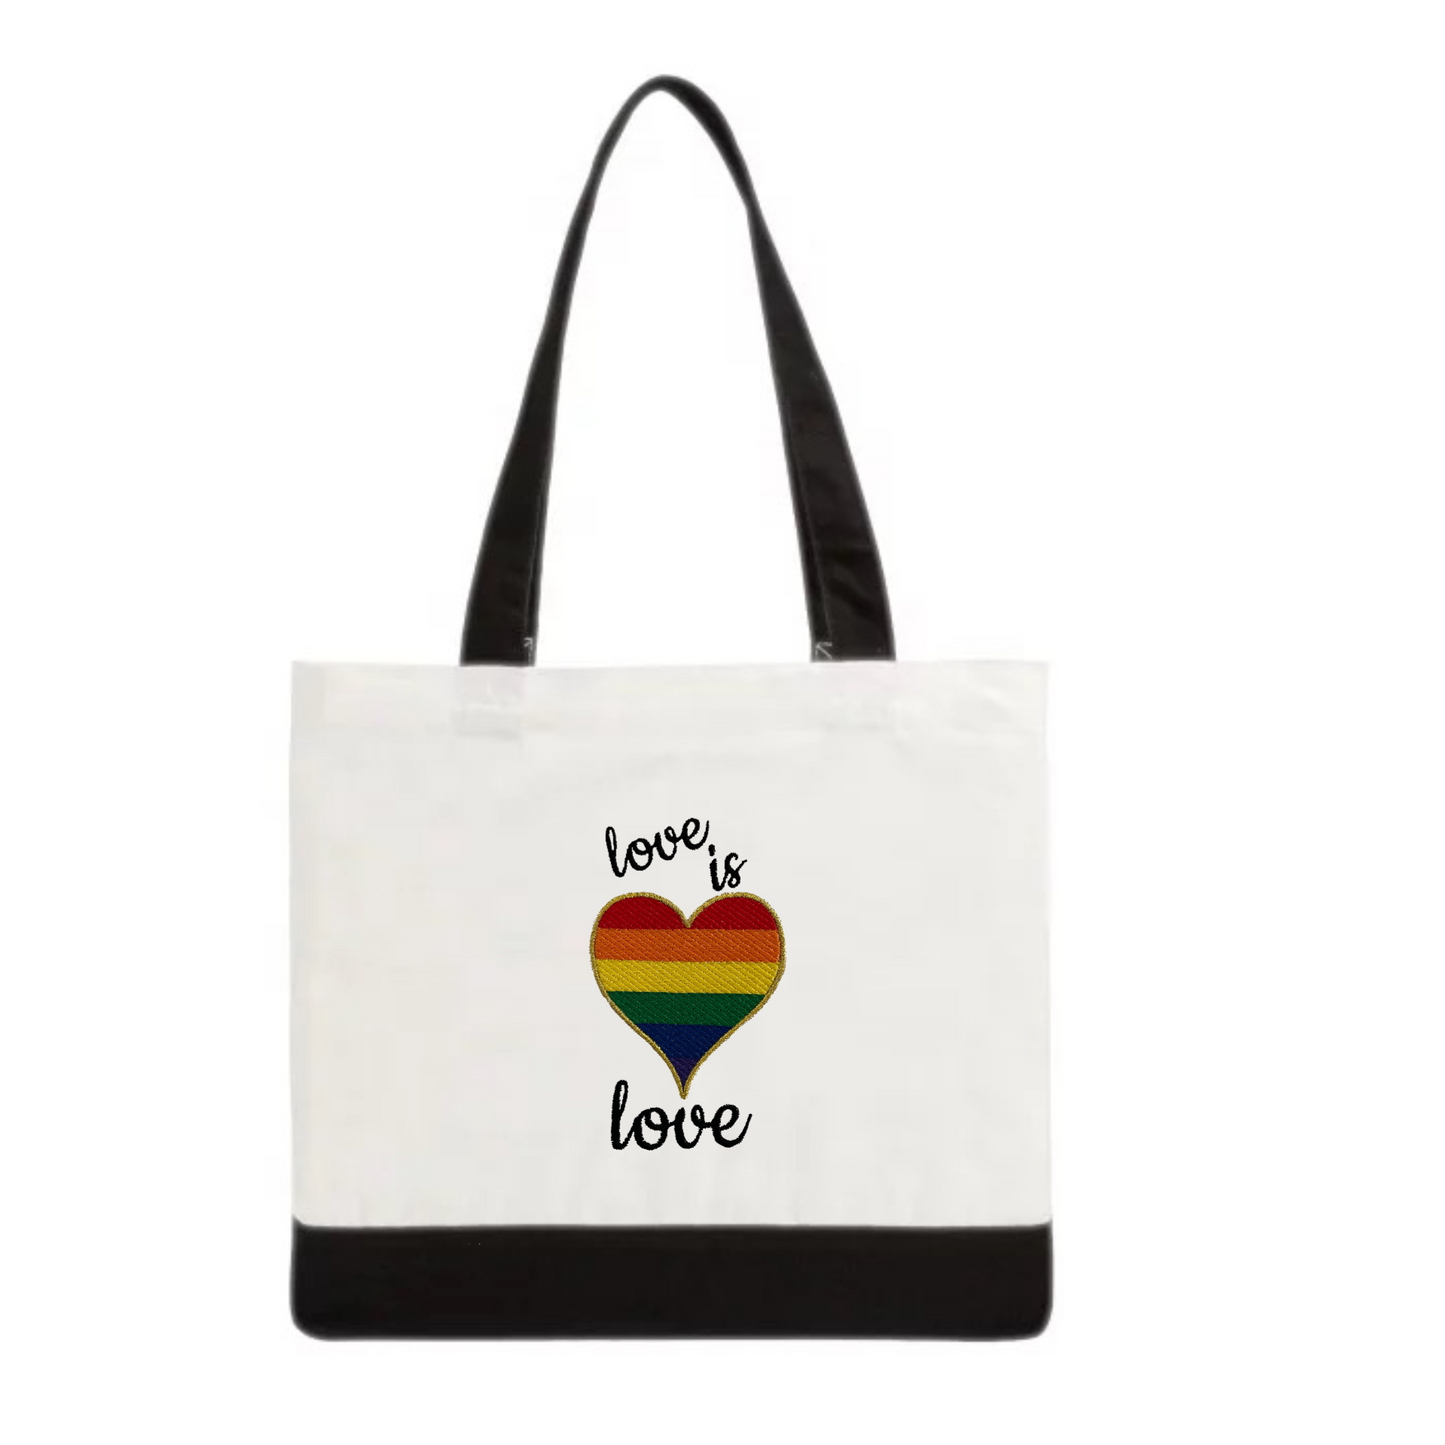 Rainbow Heart Love is Love Pride Embroidered Cotton Canvas Market Bag. Choice of 5 different bags